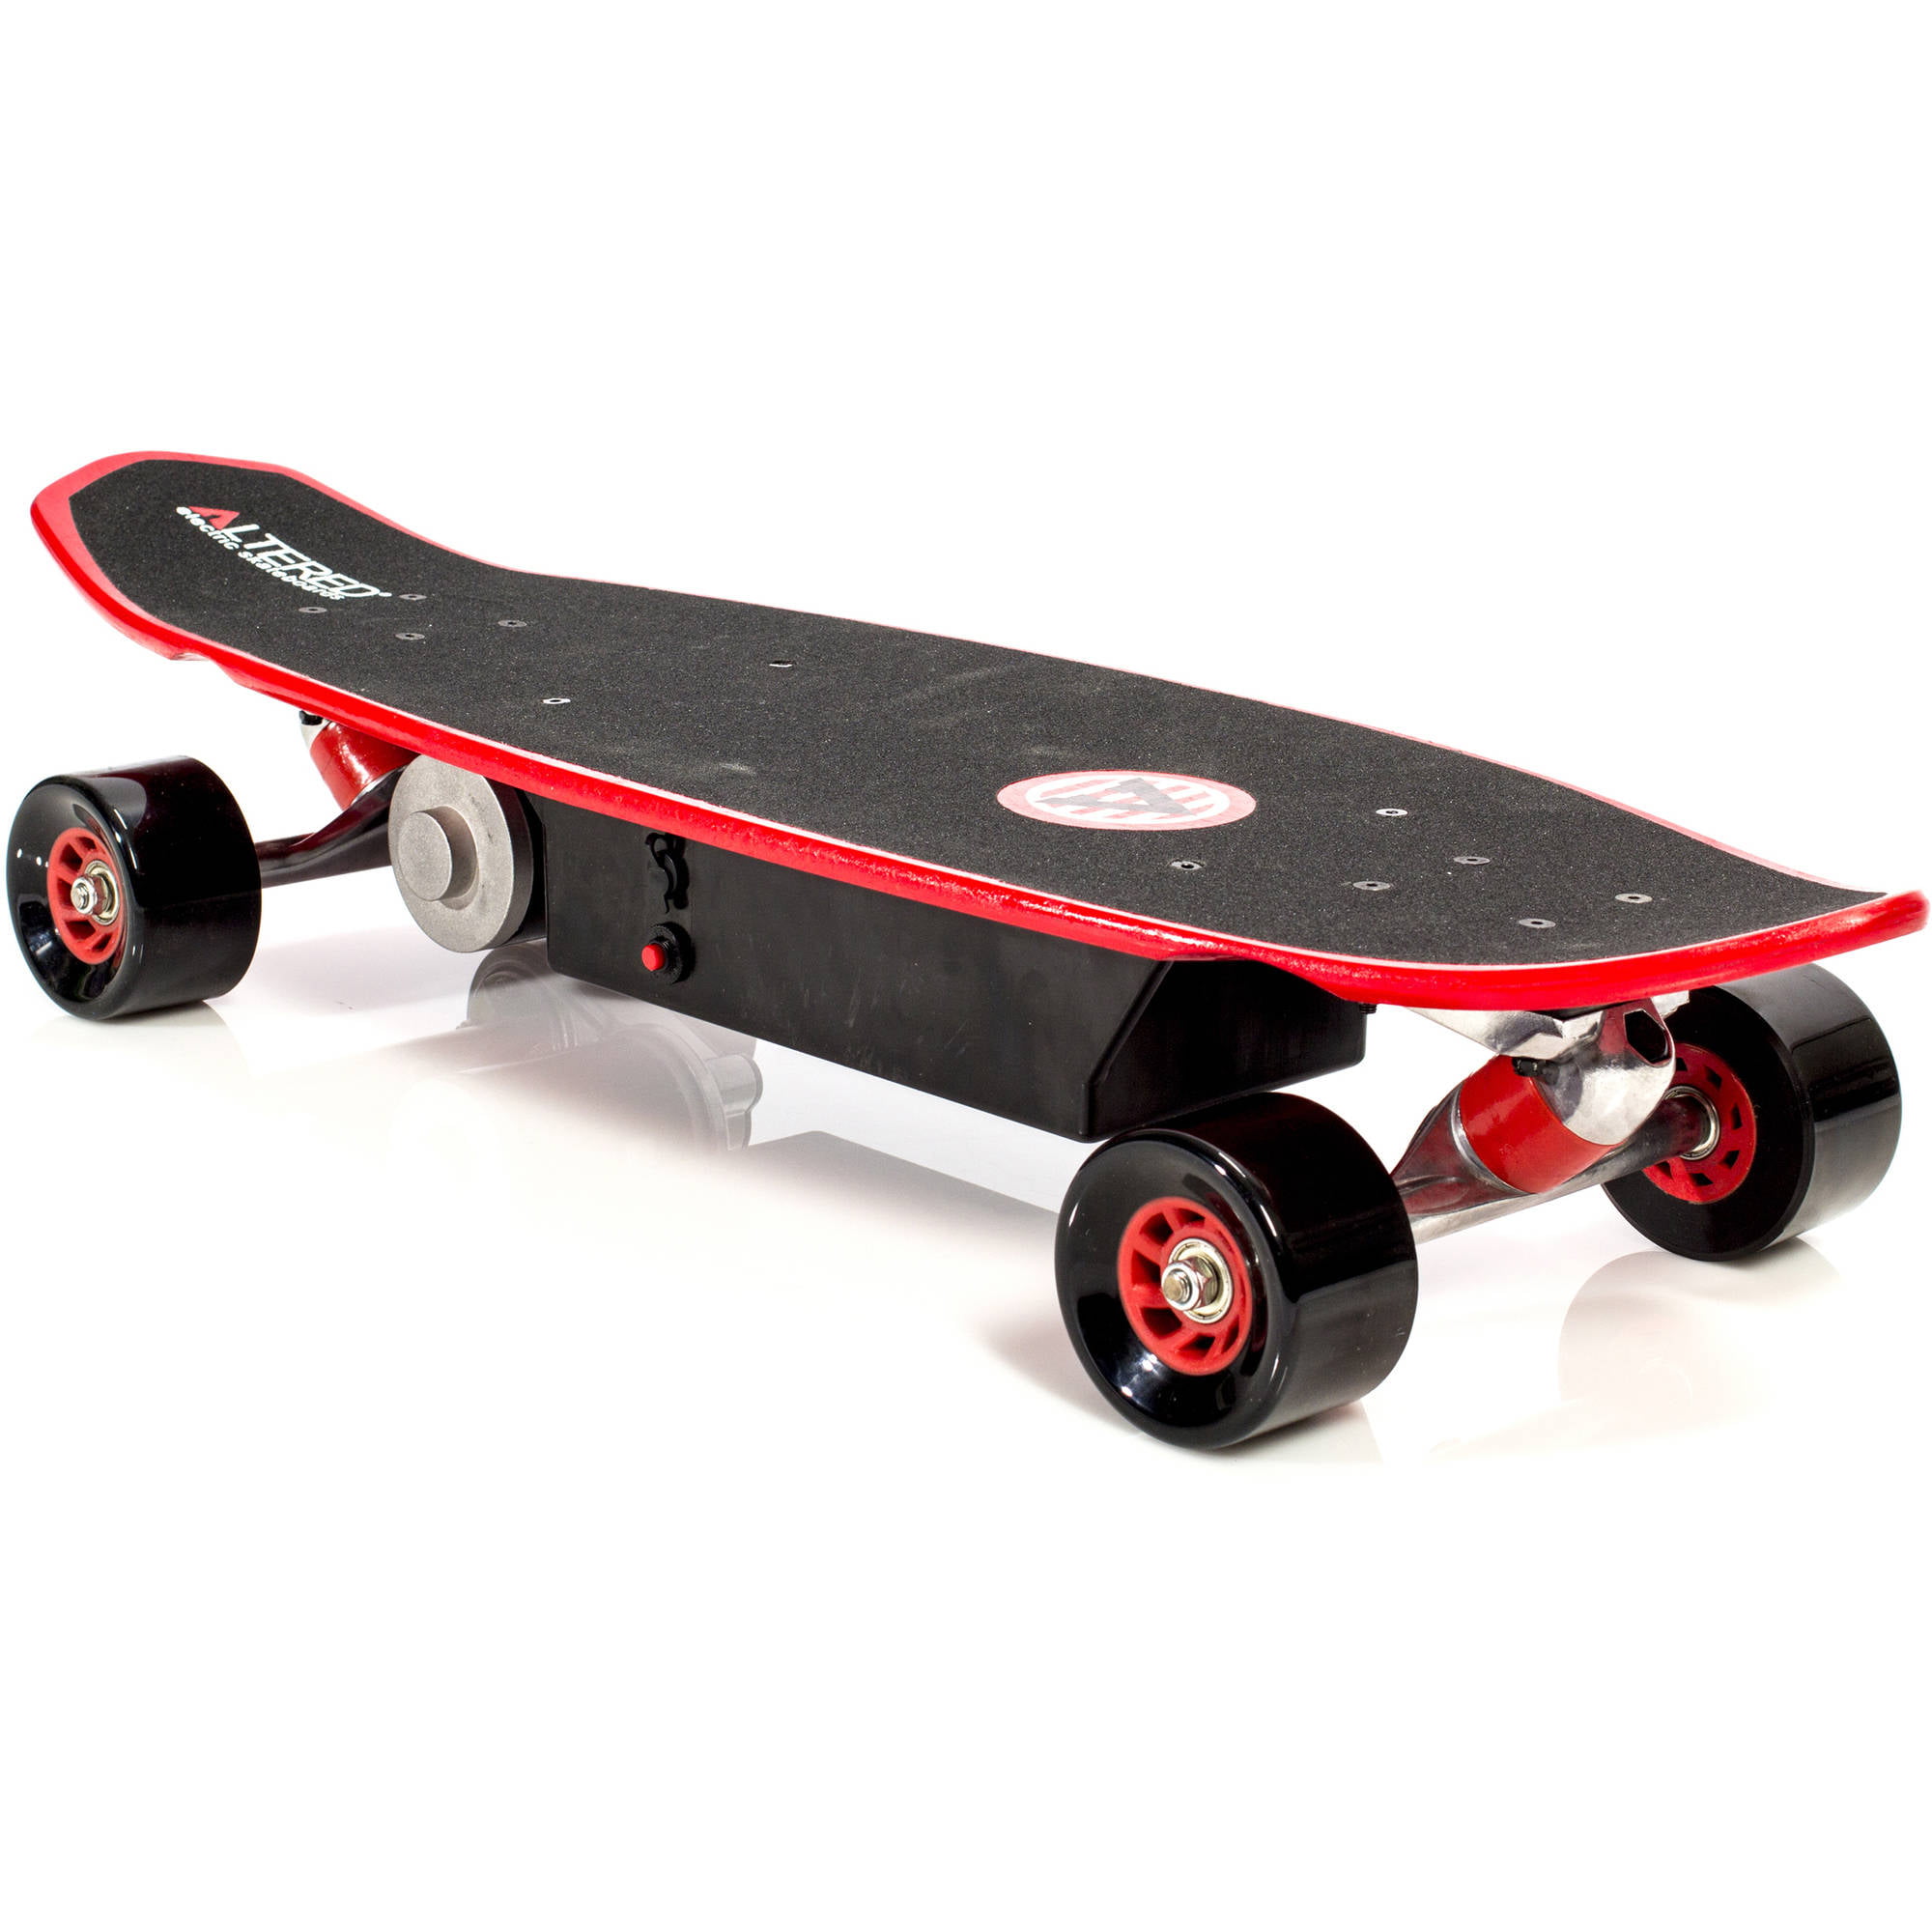 Details about   HOT Electric Skateboard Motor Cruiser Maple Longboard Remote Control Red 